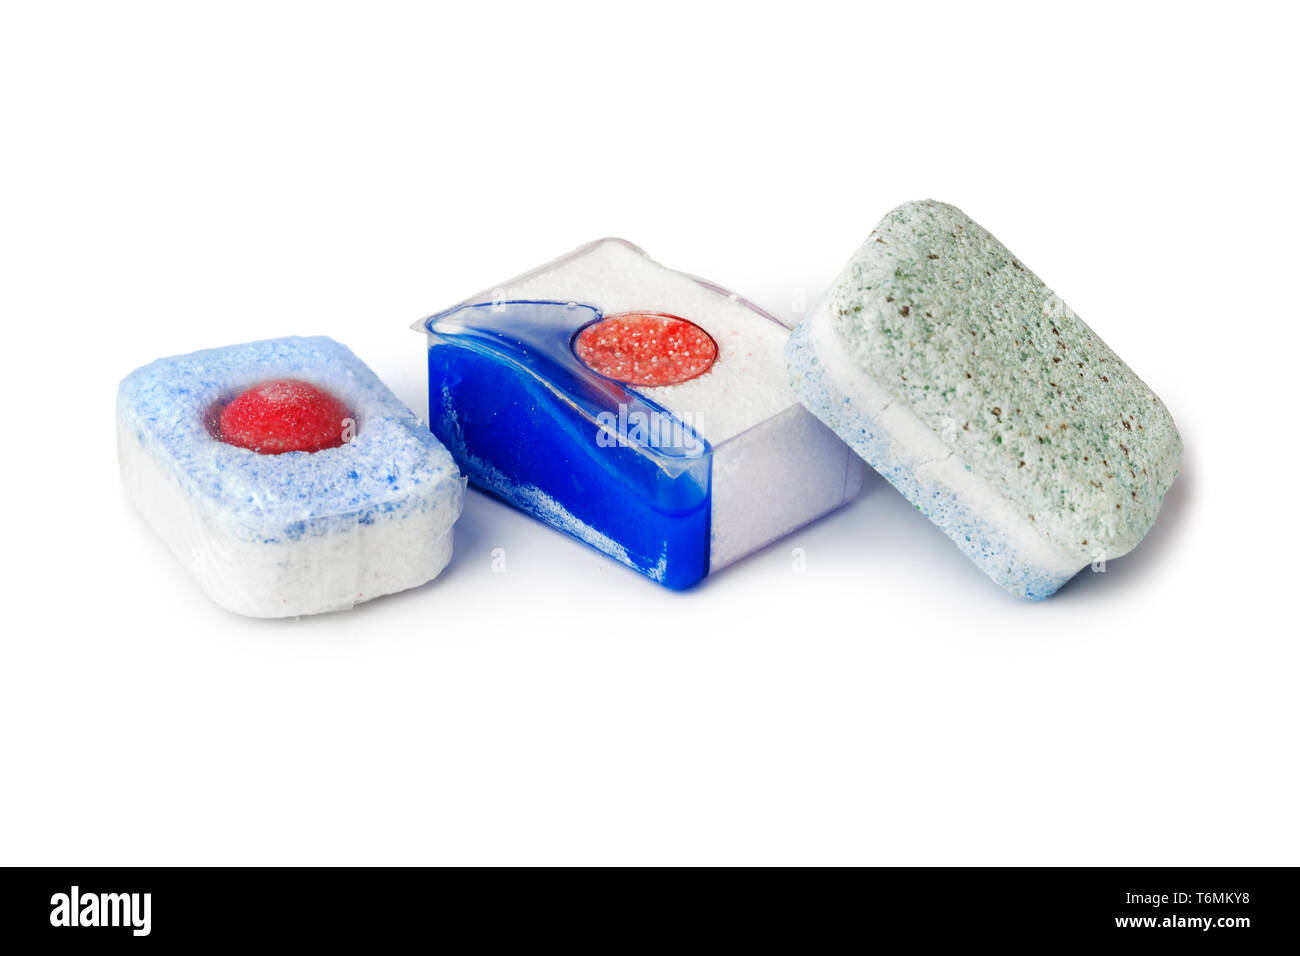 Variations of dishwasher tablets Stock Photo